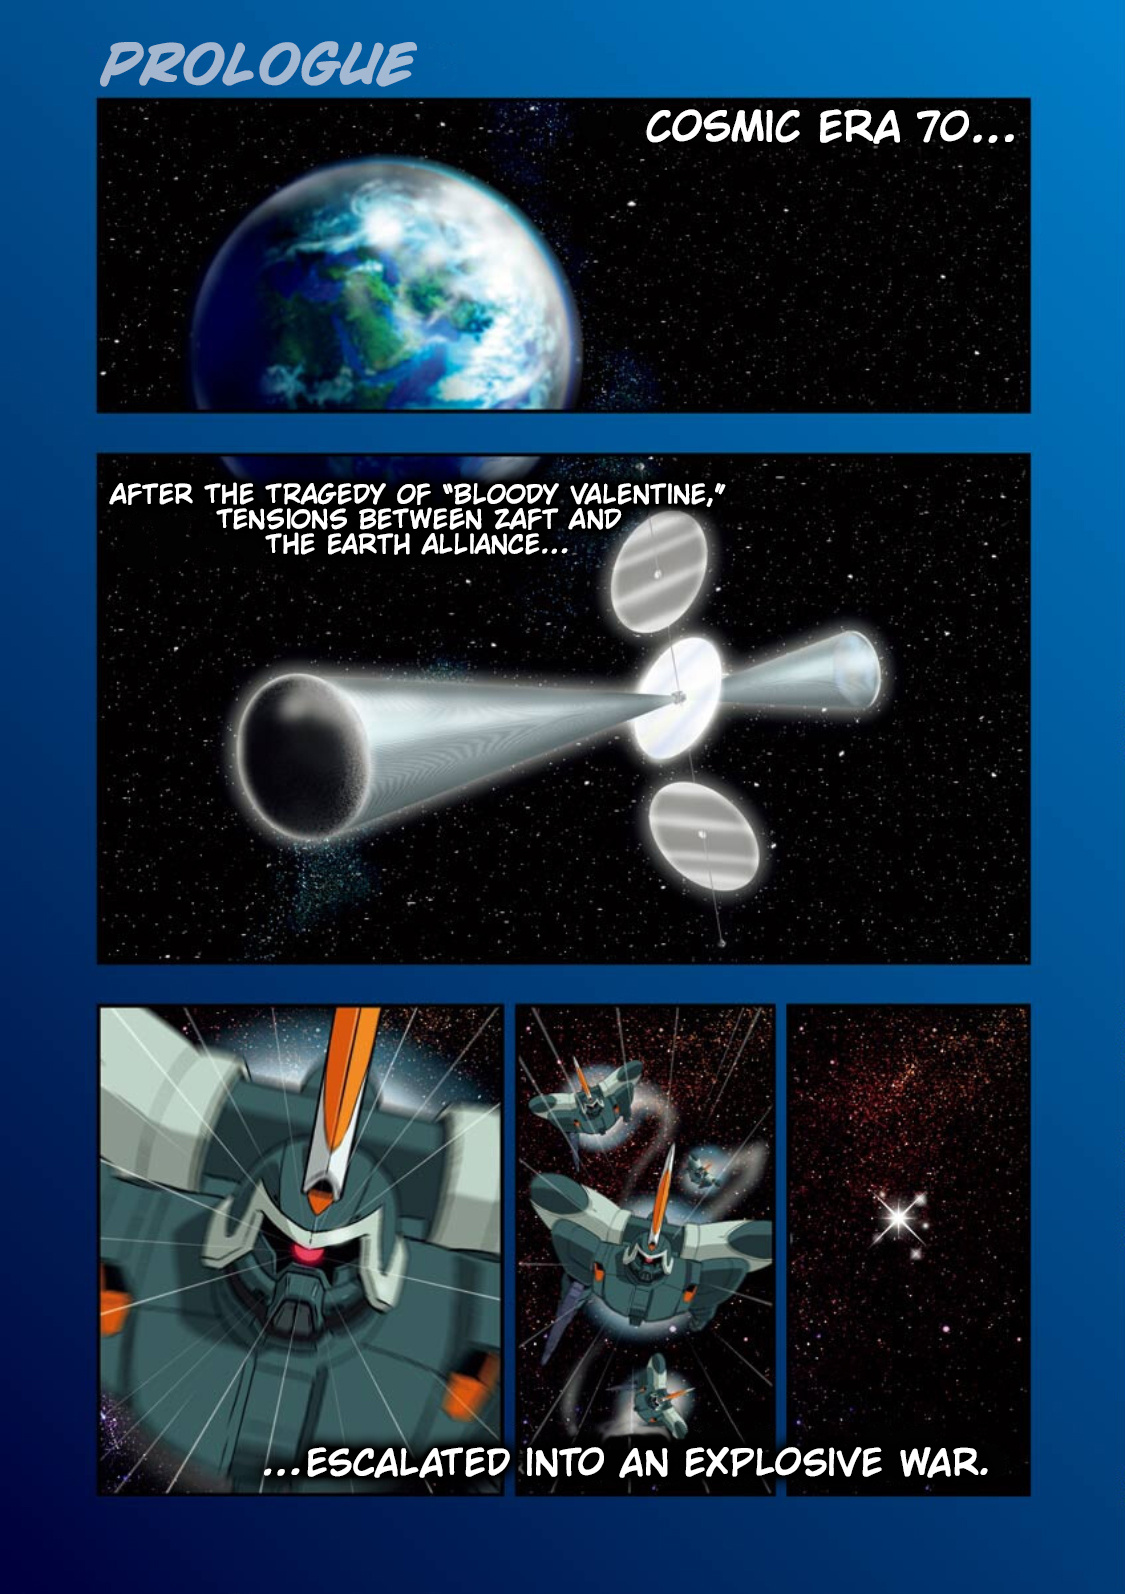 Mobile Suit Gundam Seed Astray Re:master Edition Vol.1 Chapter 0: Prologue - Picture 1